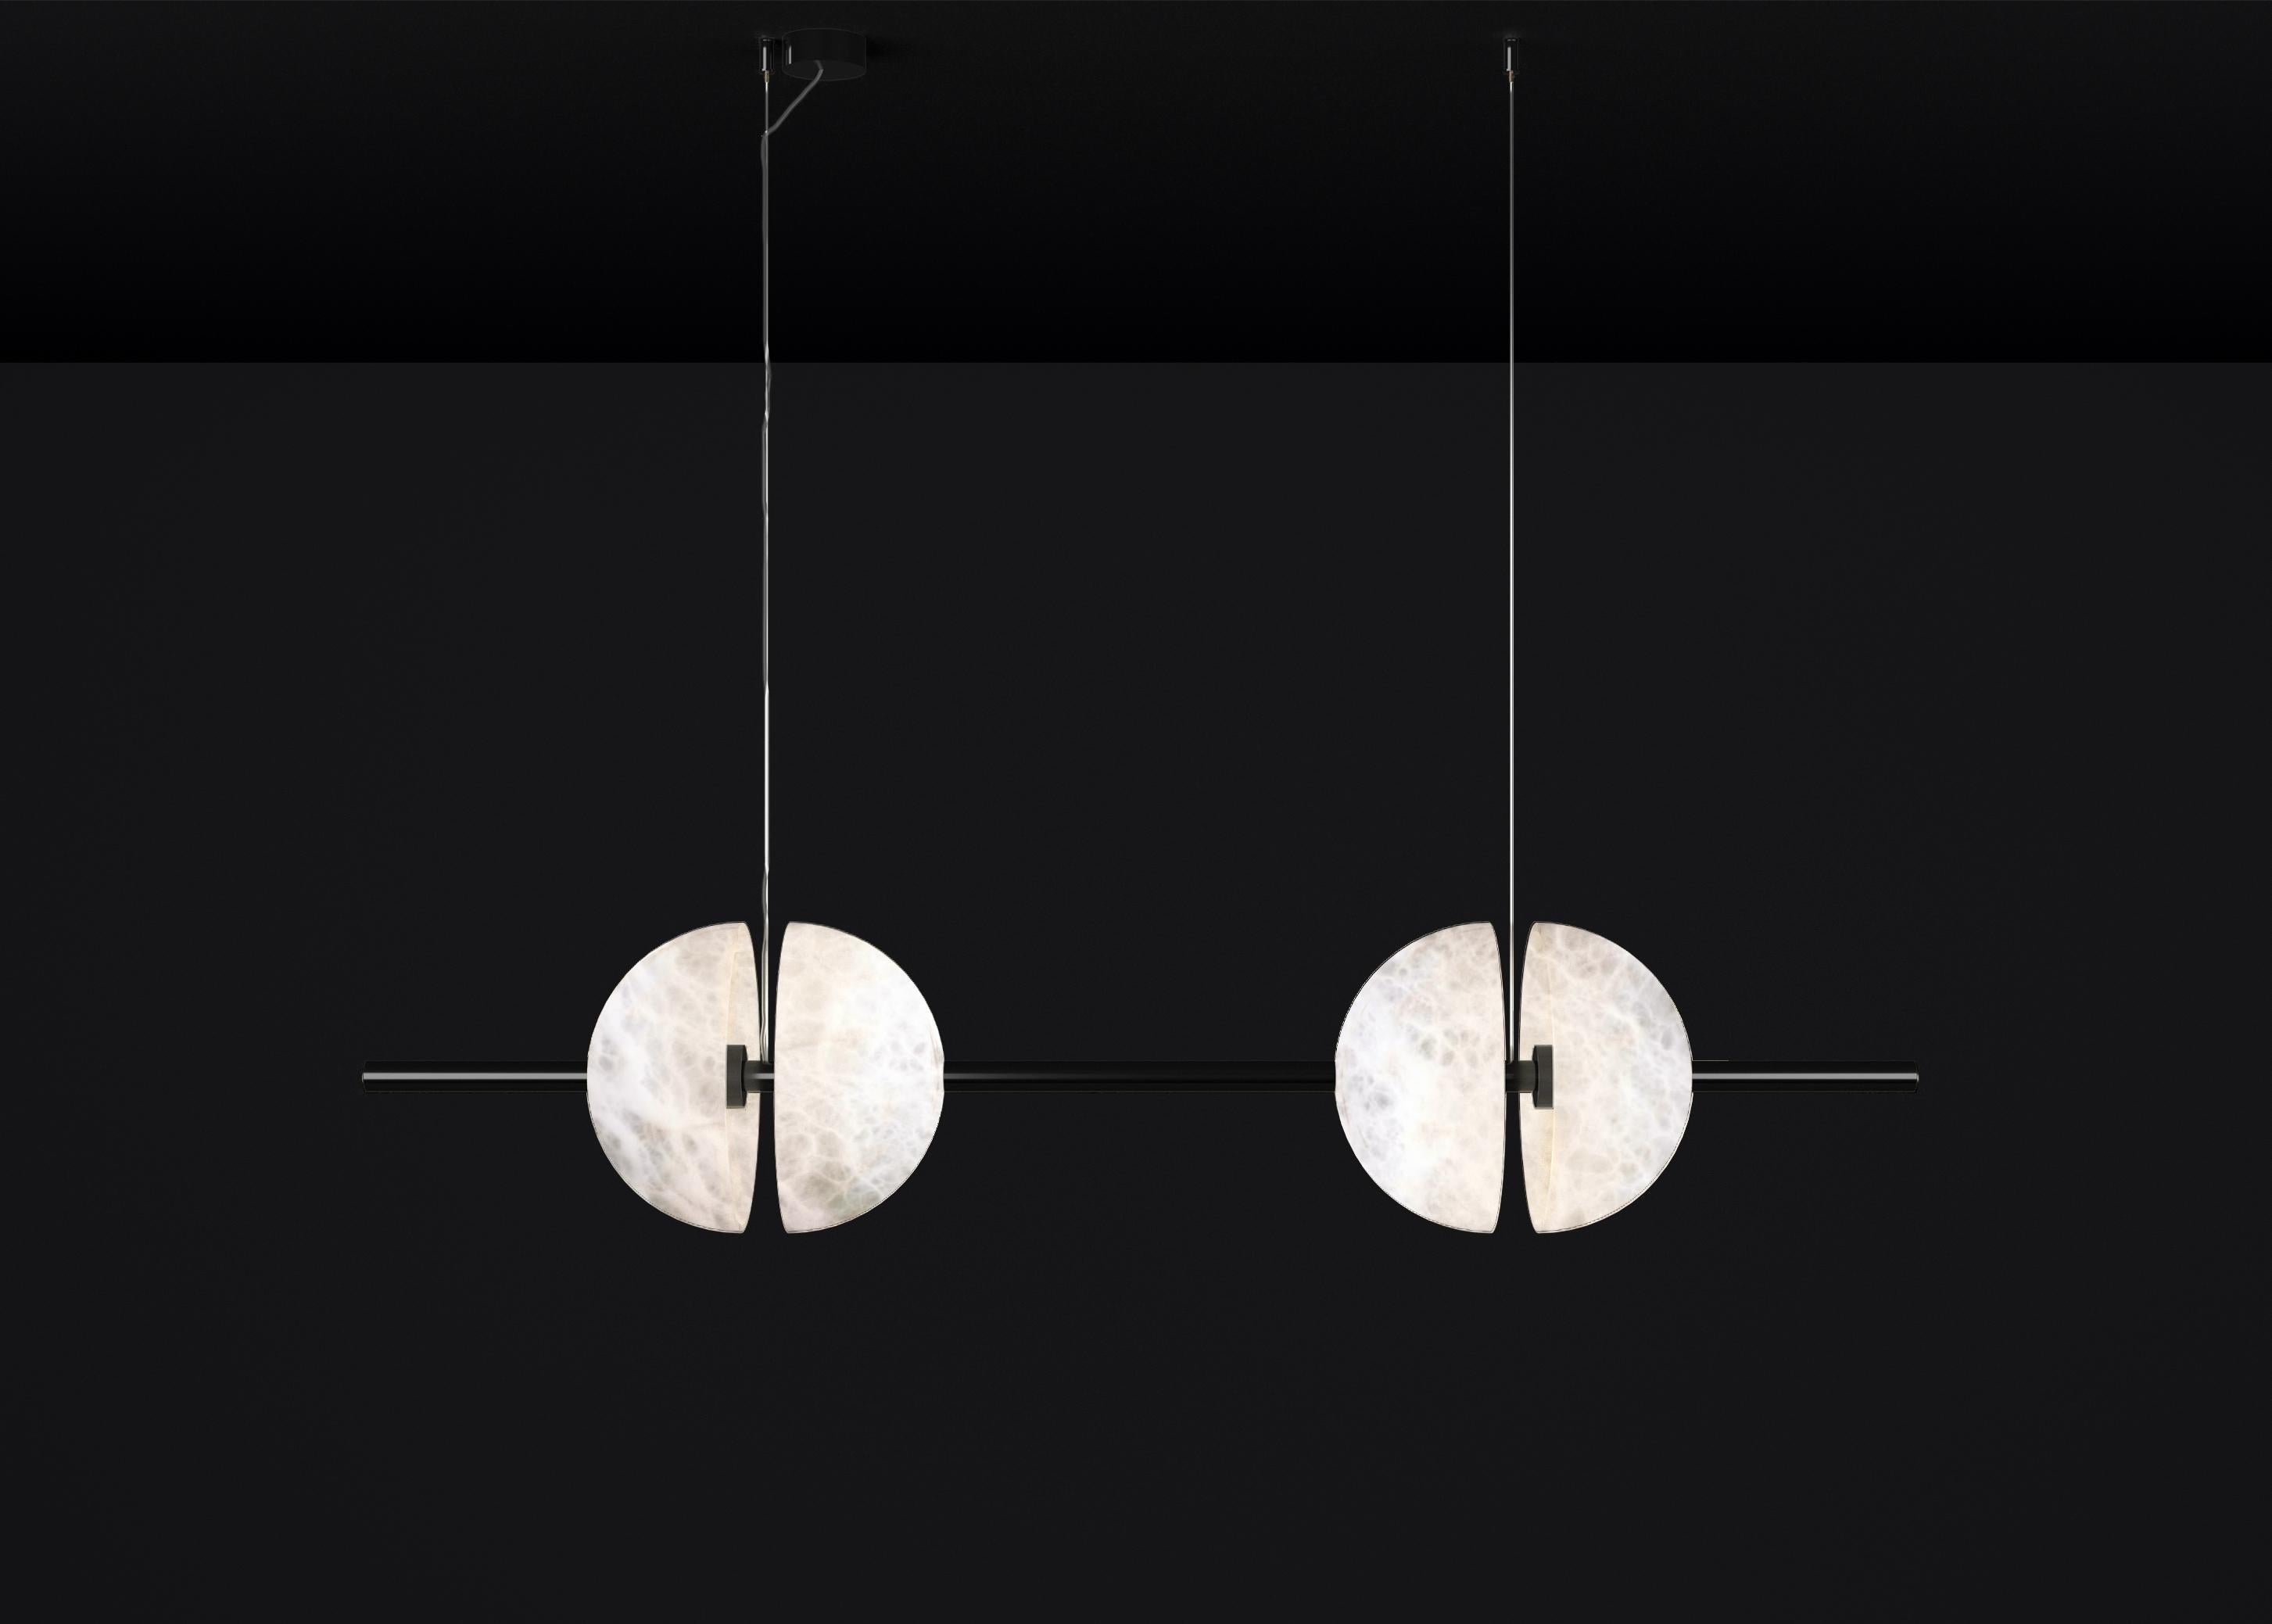 Ermes Shiny Black Metal And Alabaster Pendant Light 1 by Alabastro Italiano
Dimensions: D 30 x W 150 x H 300 cm.
Materials: White alabaster and shiny black metal.

Available in different finishes: Shiny Silver, Bronze, Brushed Brass, Ruggine of